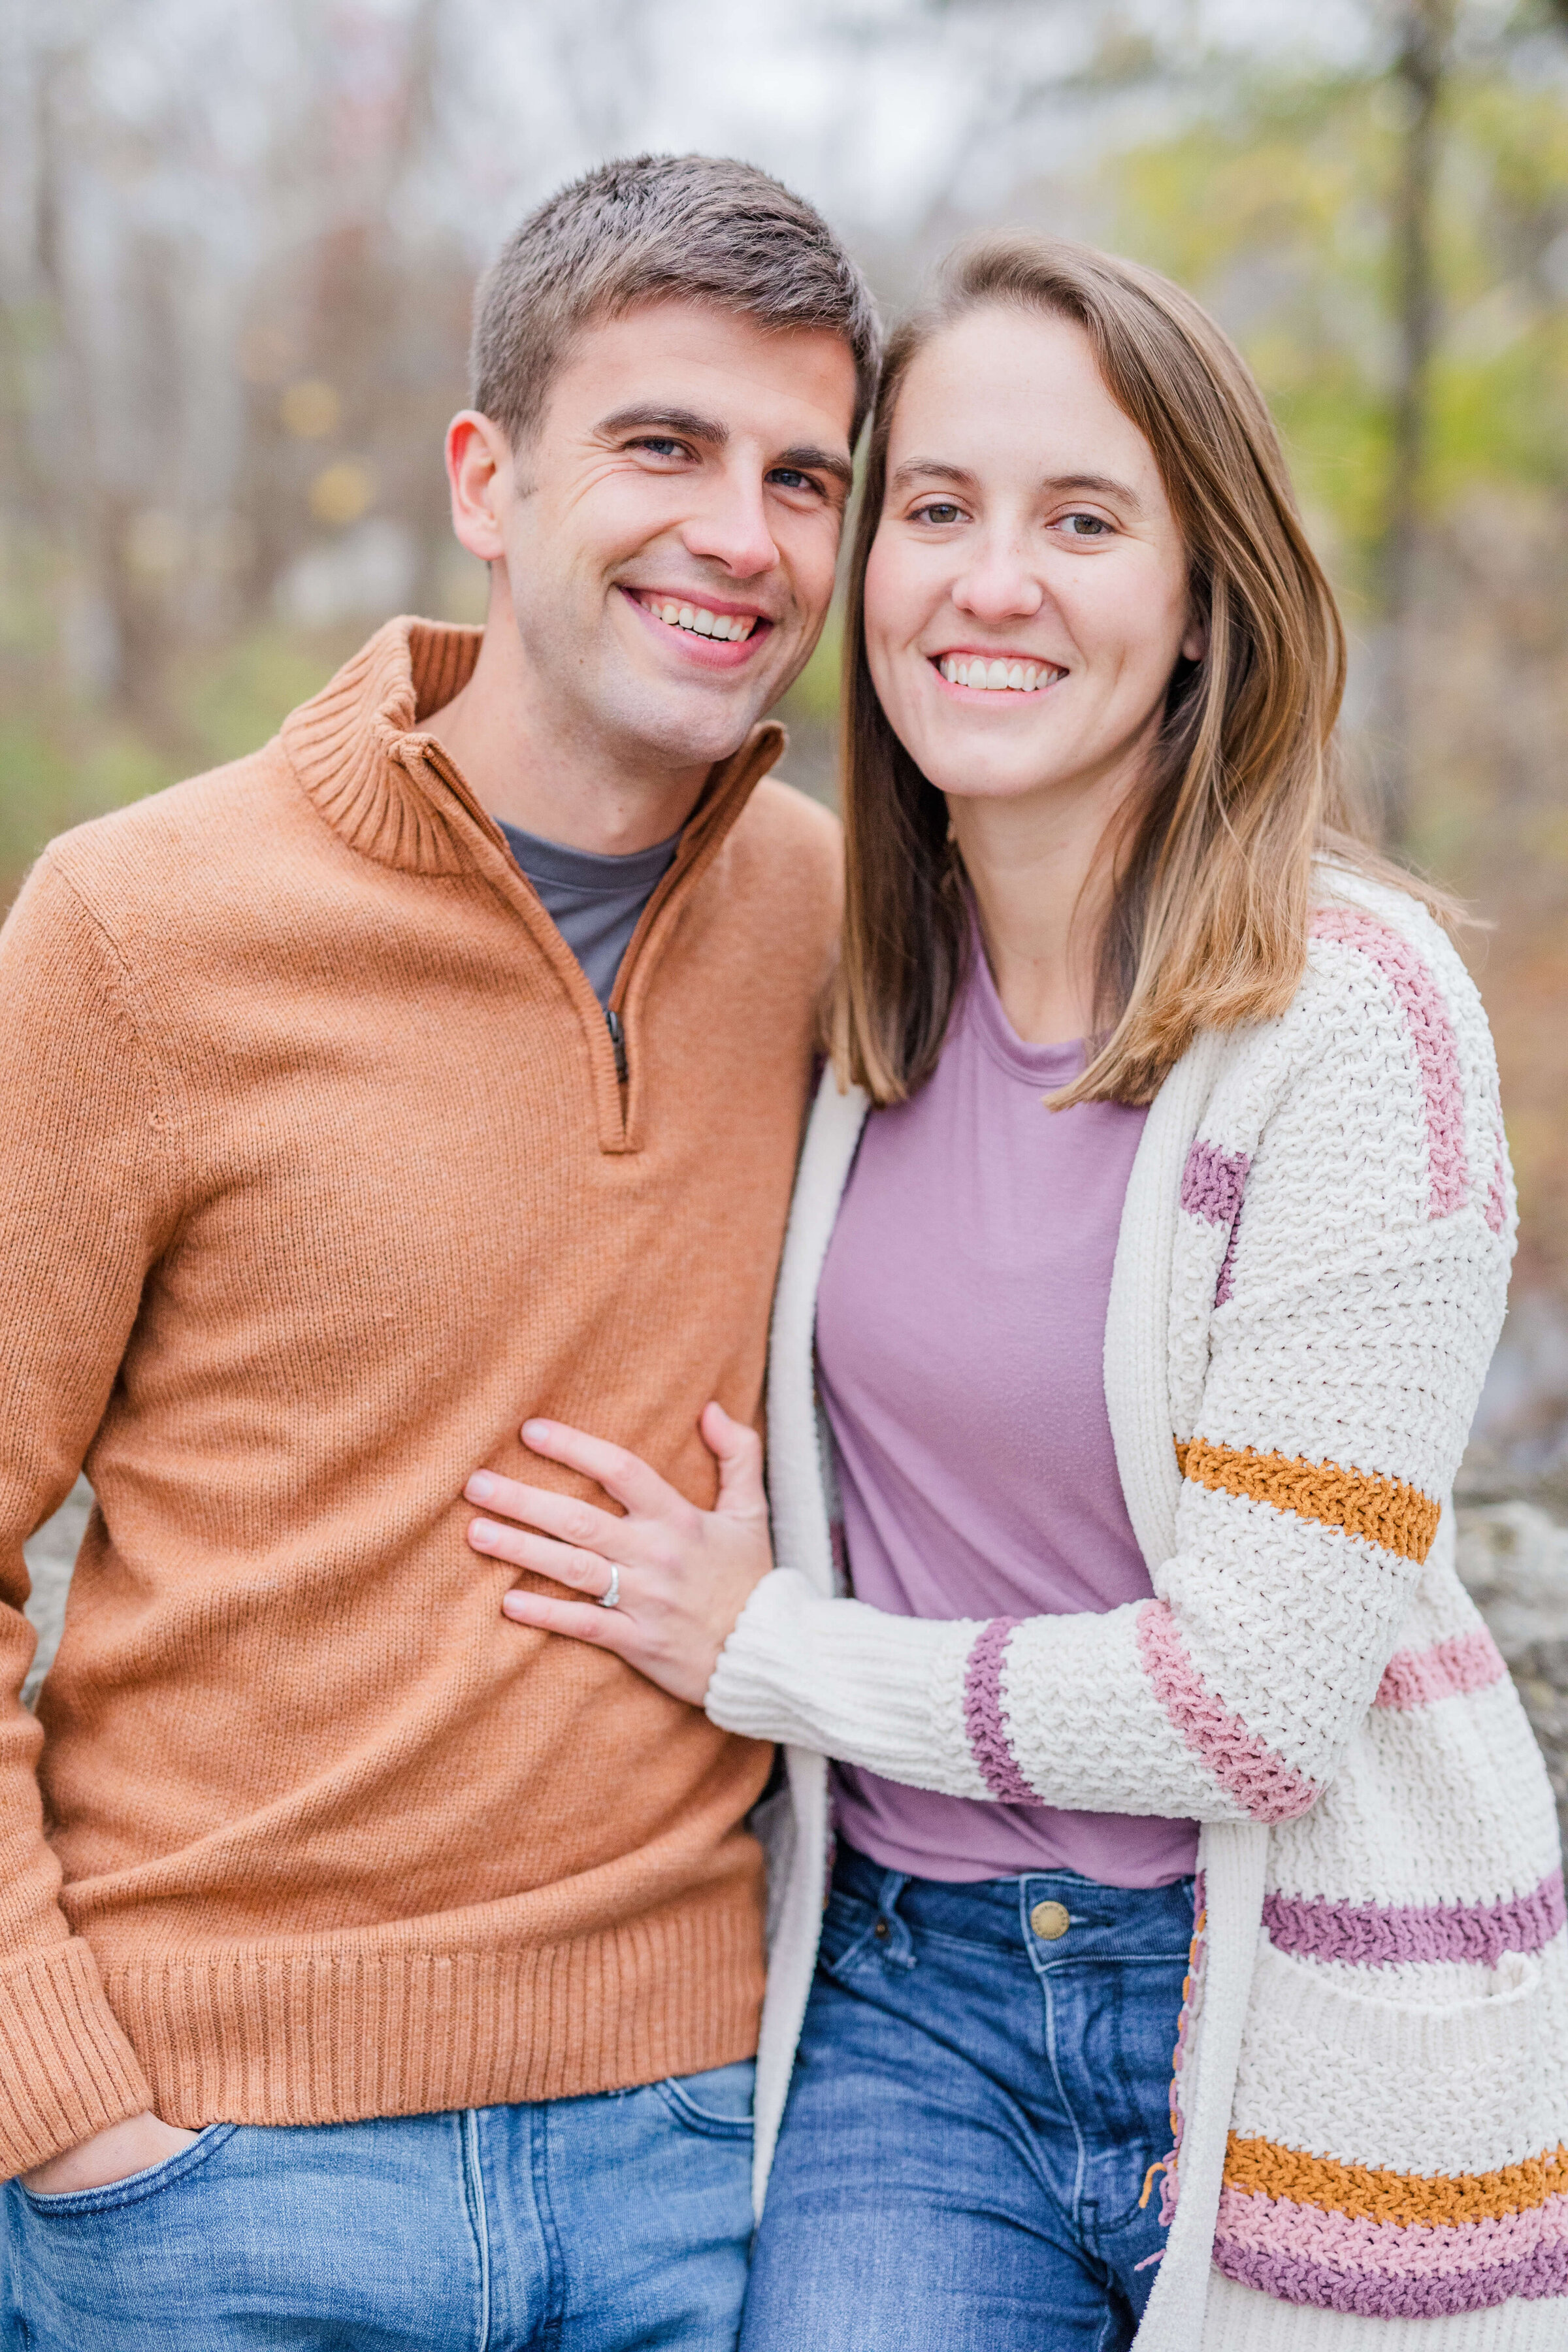 A man and woman stand next to each other smiling at the camera. They are in orange and purple sweaters